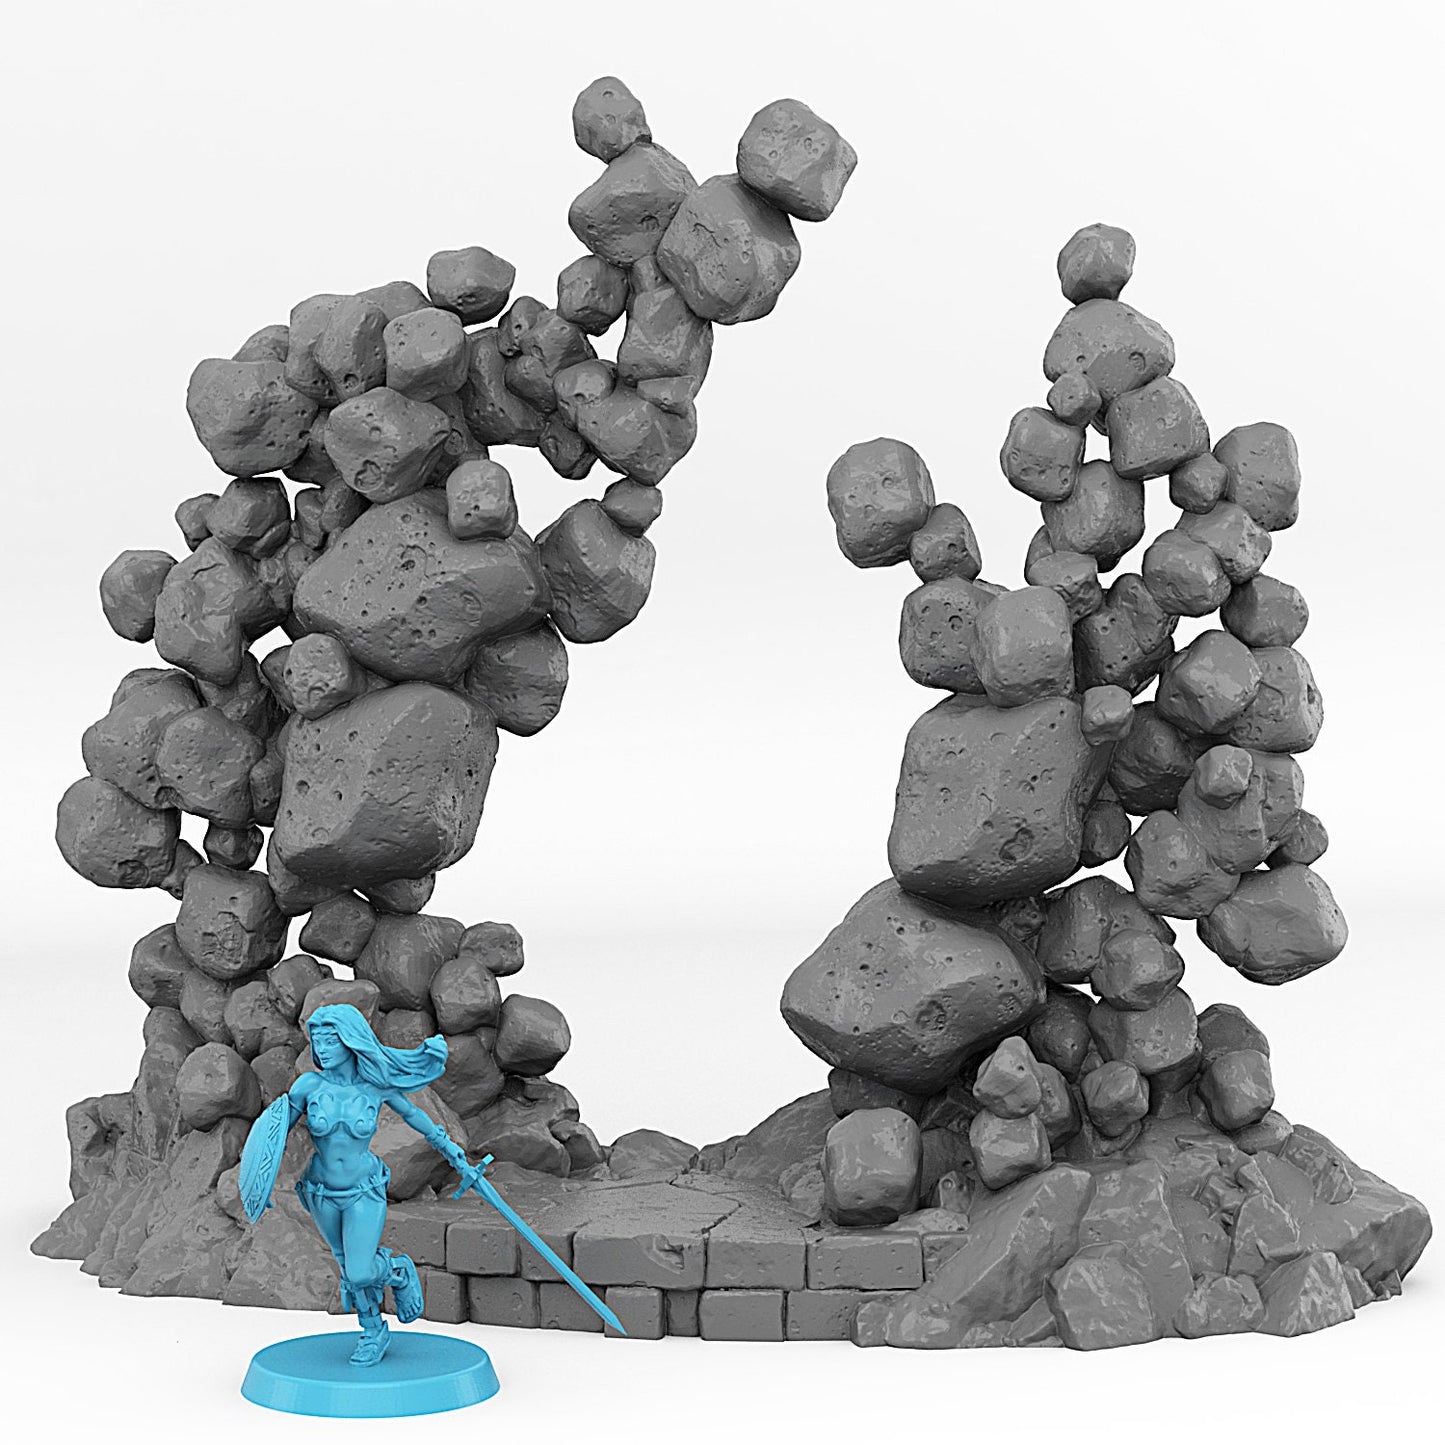 Gravity Portal | Scenery and terrain | 3D Printed Resin Miniature | Tabletop Role Playing | AoS | D&D | 40K | Pathfinder